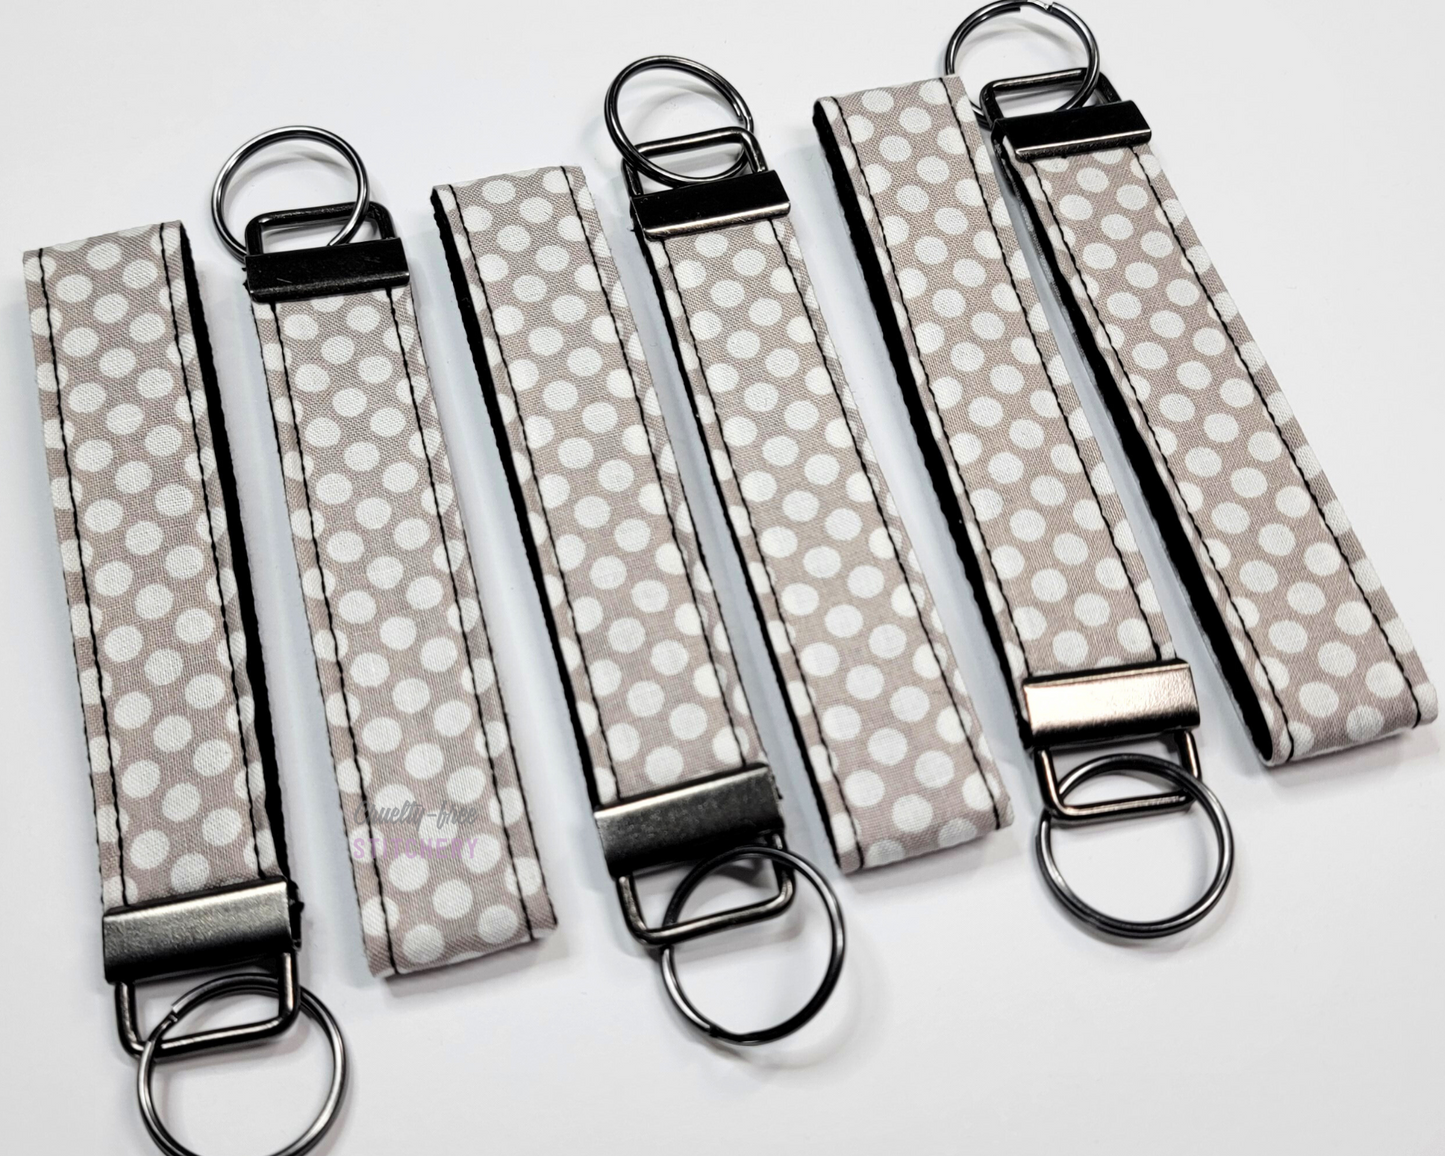 Wristlet key fobs arranged in a row of six with ends alternating. The wristlet is light grey fabric with closely printed white dots. The hardware and key ring are gunmetal silver.